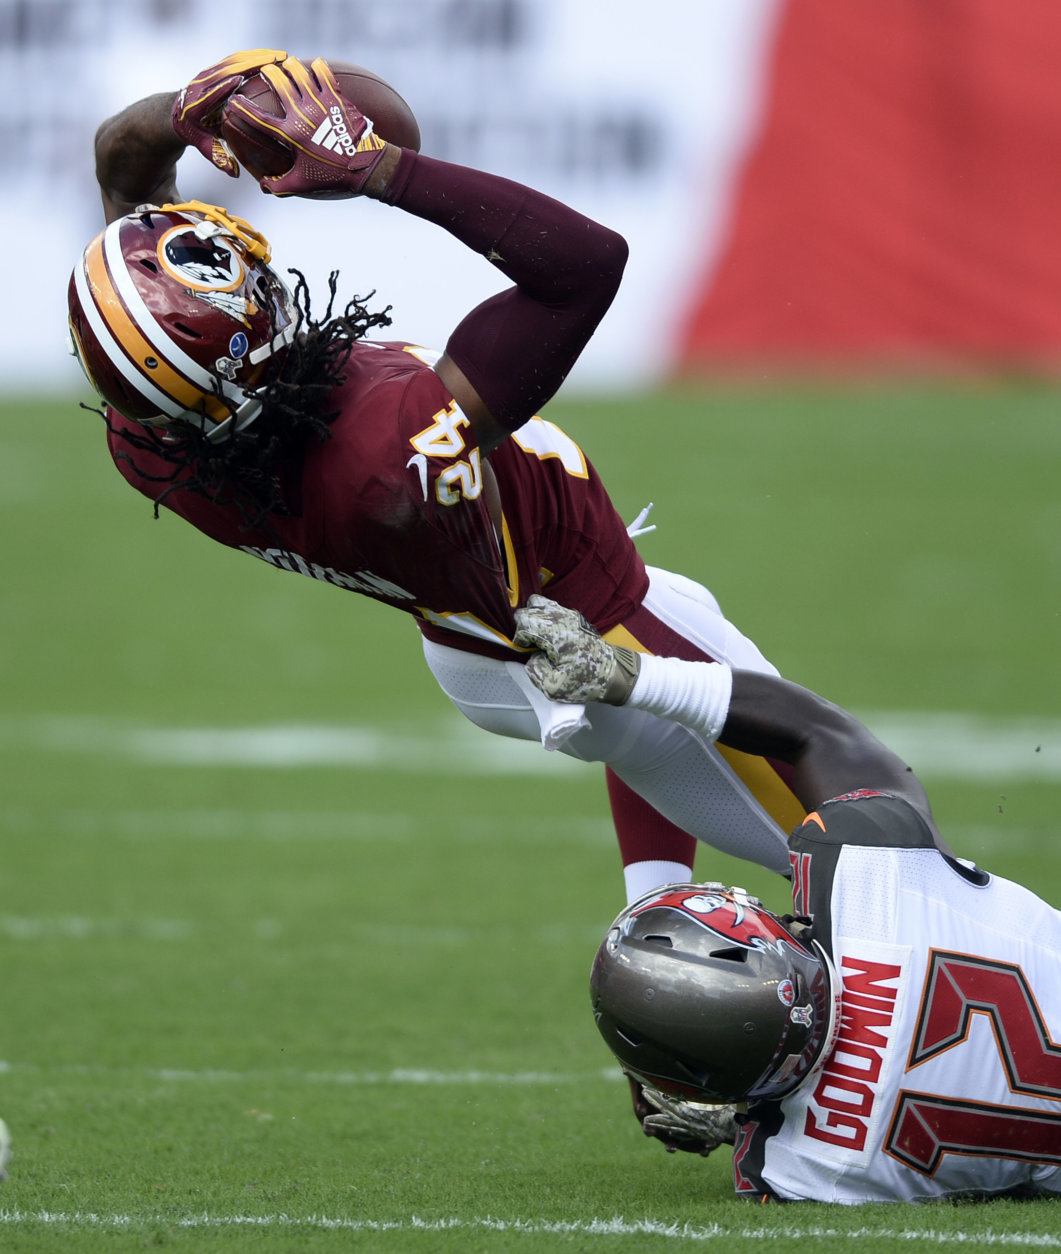 Washington Redskins cornerback Josh Norman (24) interecpts a pass by Tampa Bay Buccaneers' Ryan Fitzpatrick (14) intended for wide receiver Chris Godwin (12) during the first half of an NFL football game Sunday, Nov. 11, 2018, in Tampa, Fla. (AP Photo/Jason Behnken)